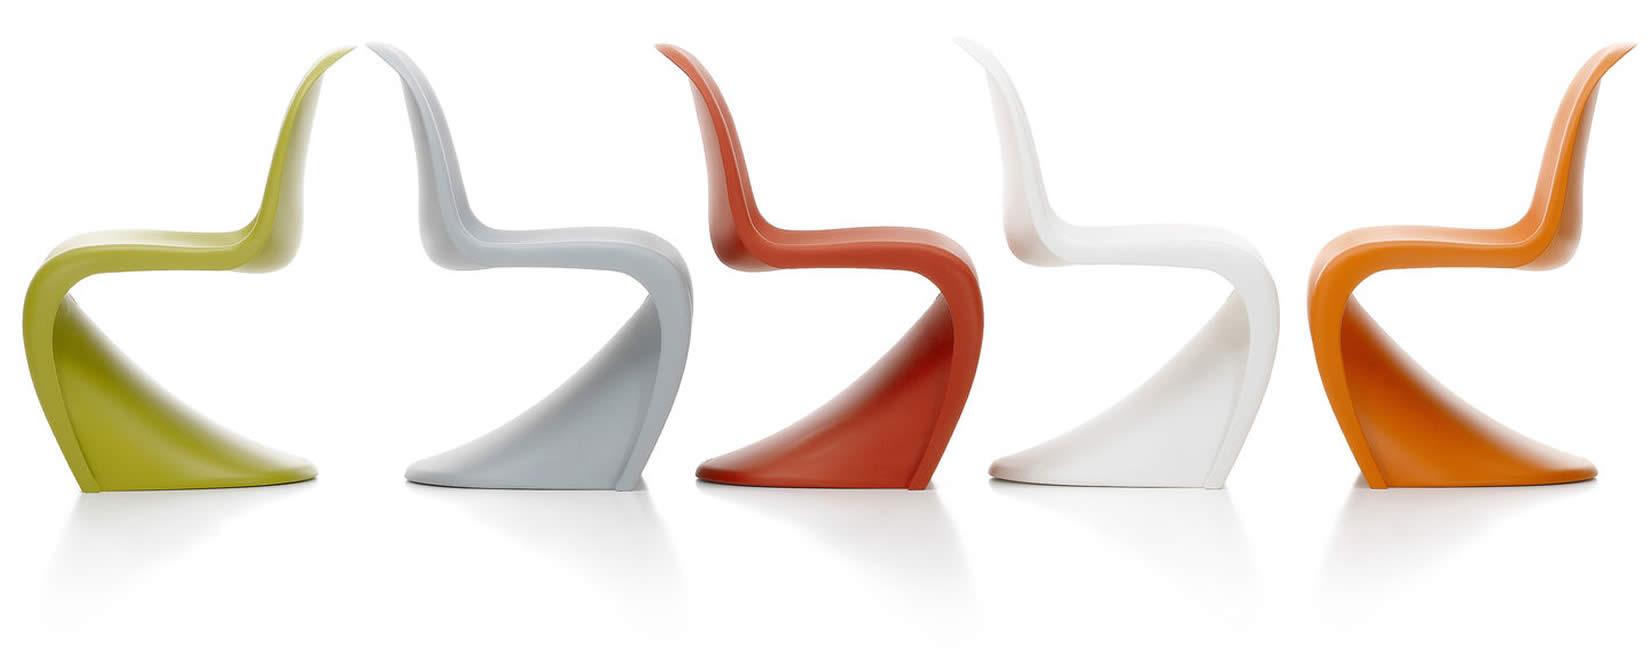 Vitra Panton Chair. How was it Made?